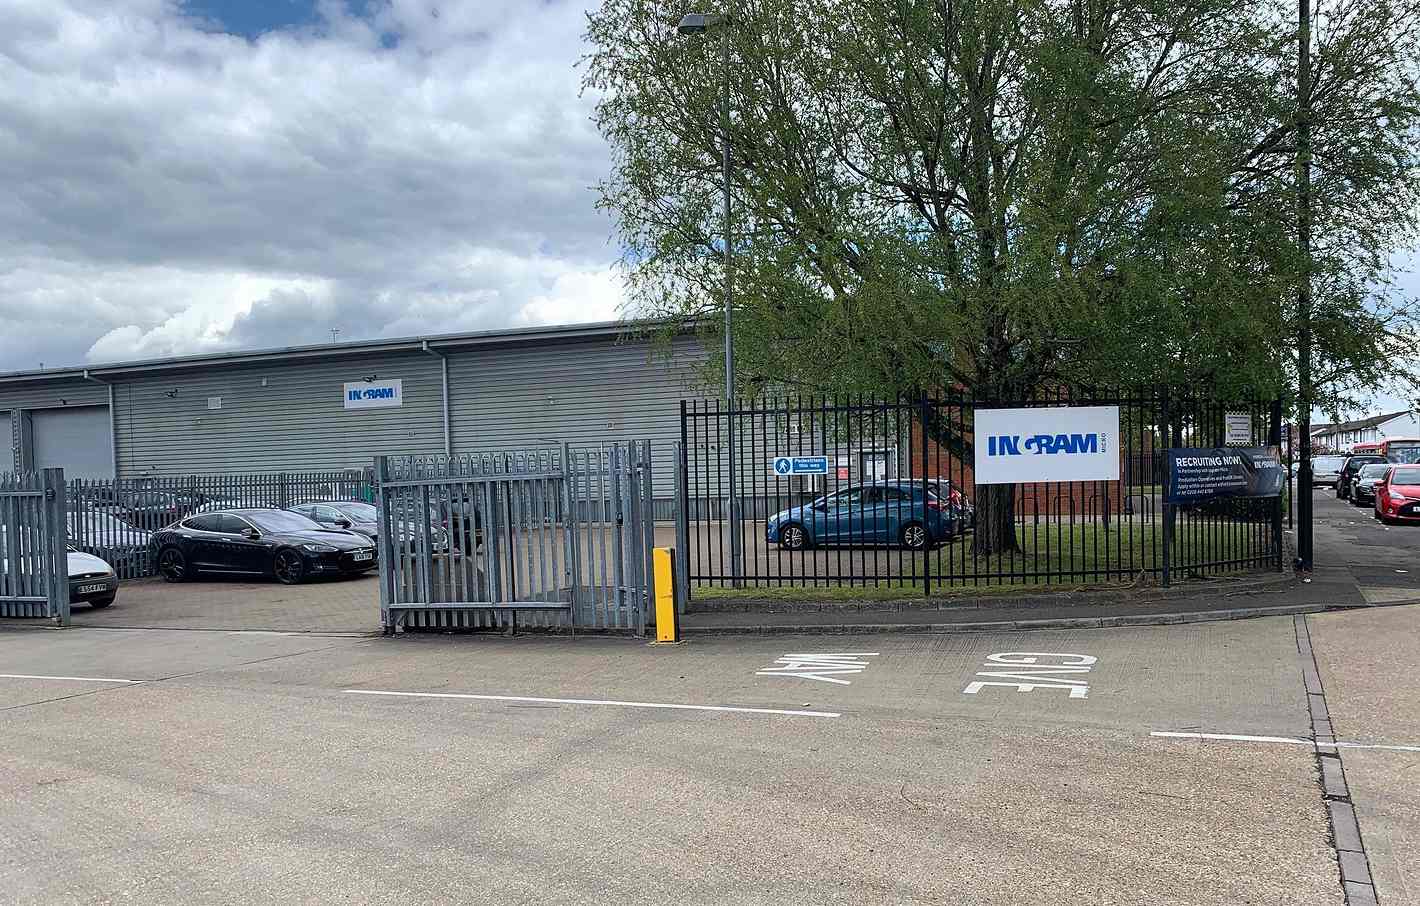 Ingram Micro Lifecycle facility in Enfield, UK